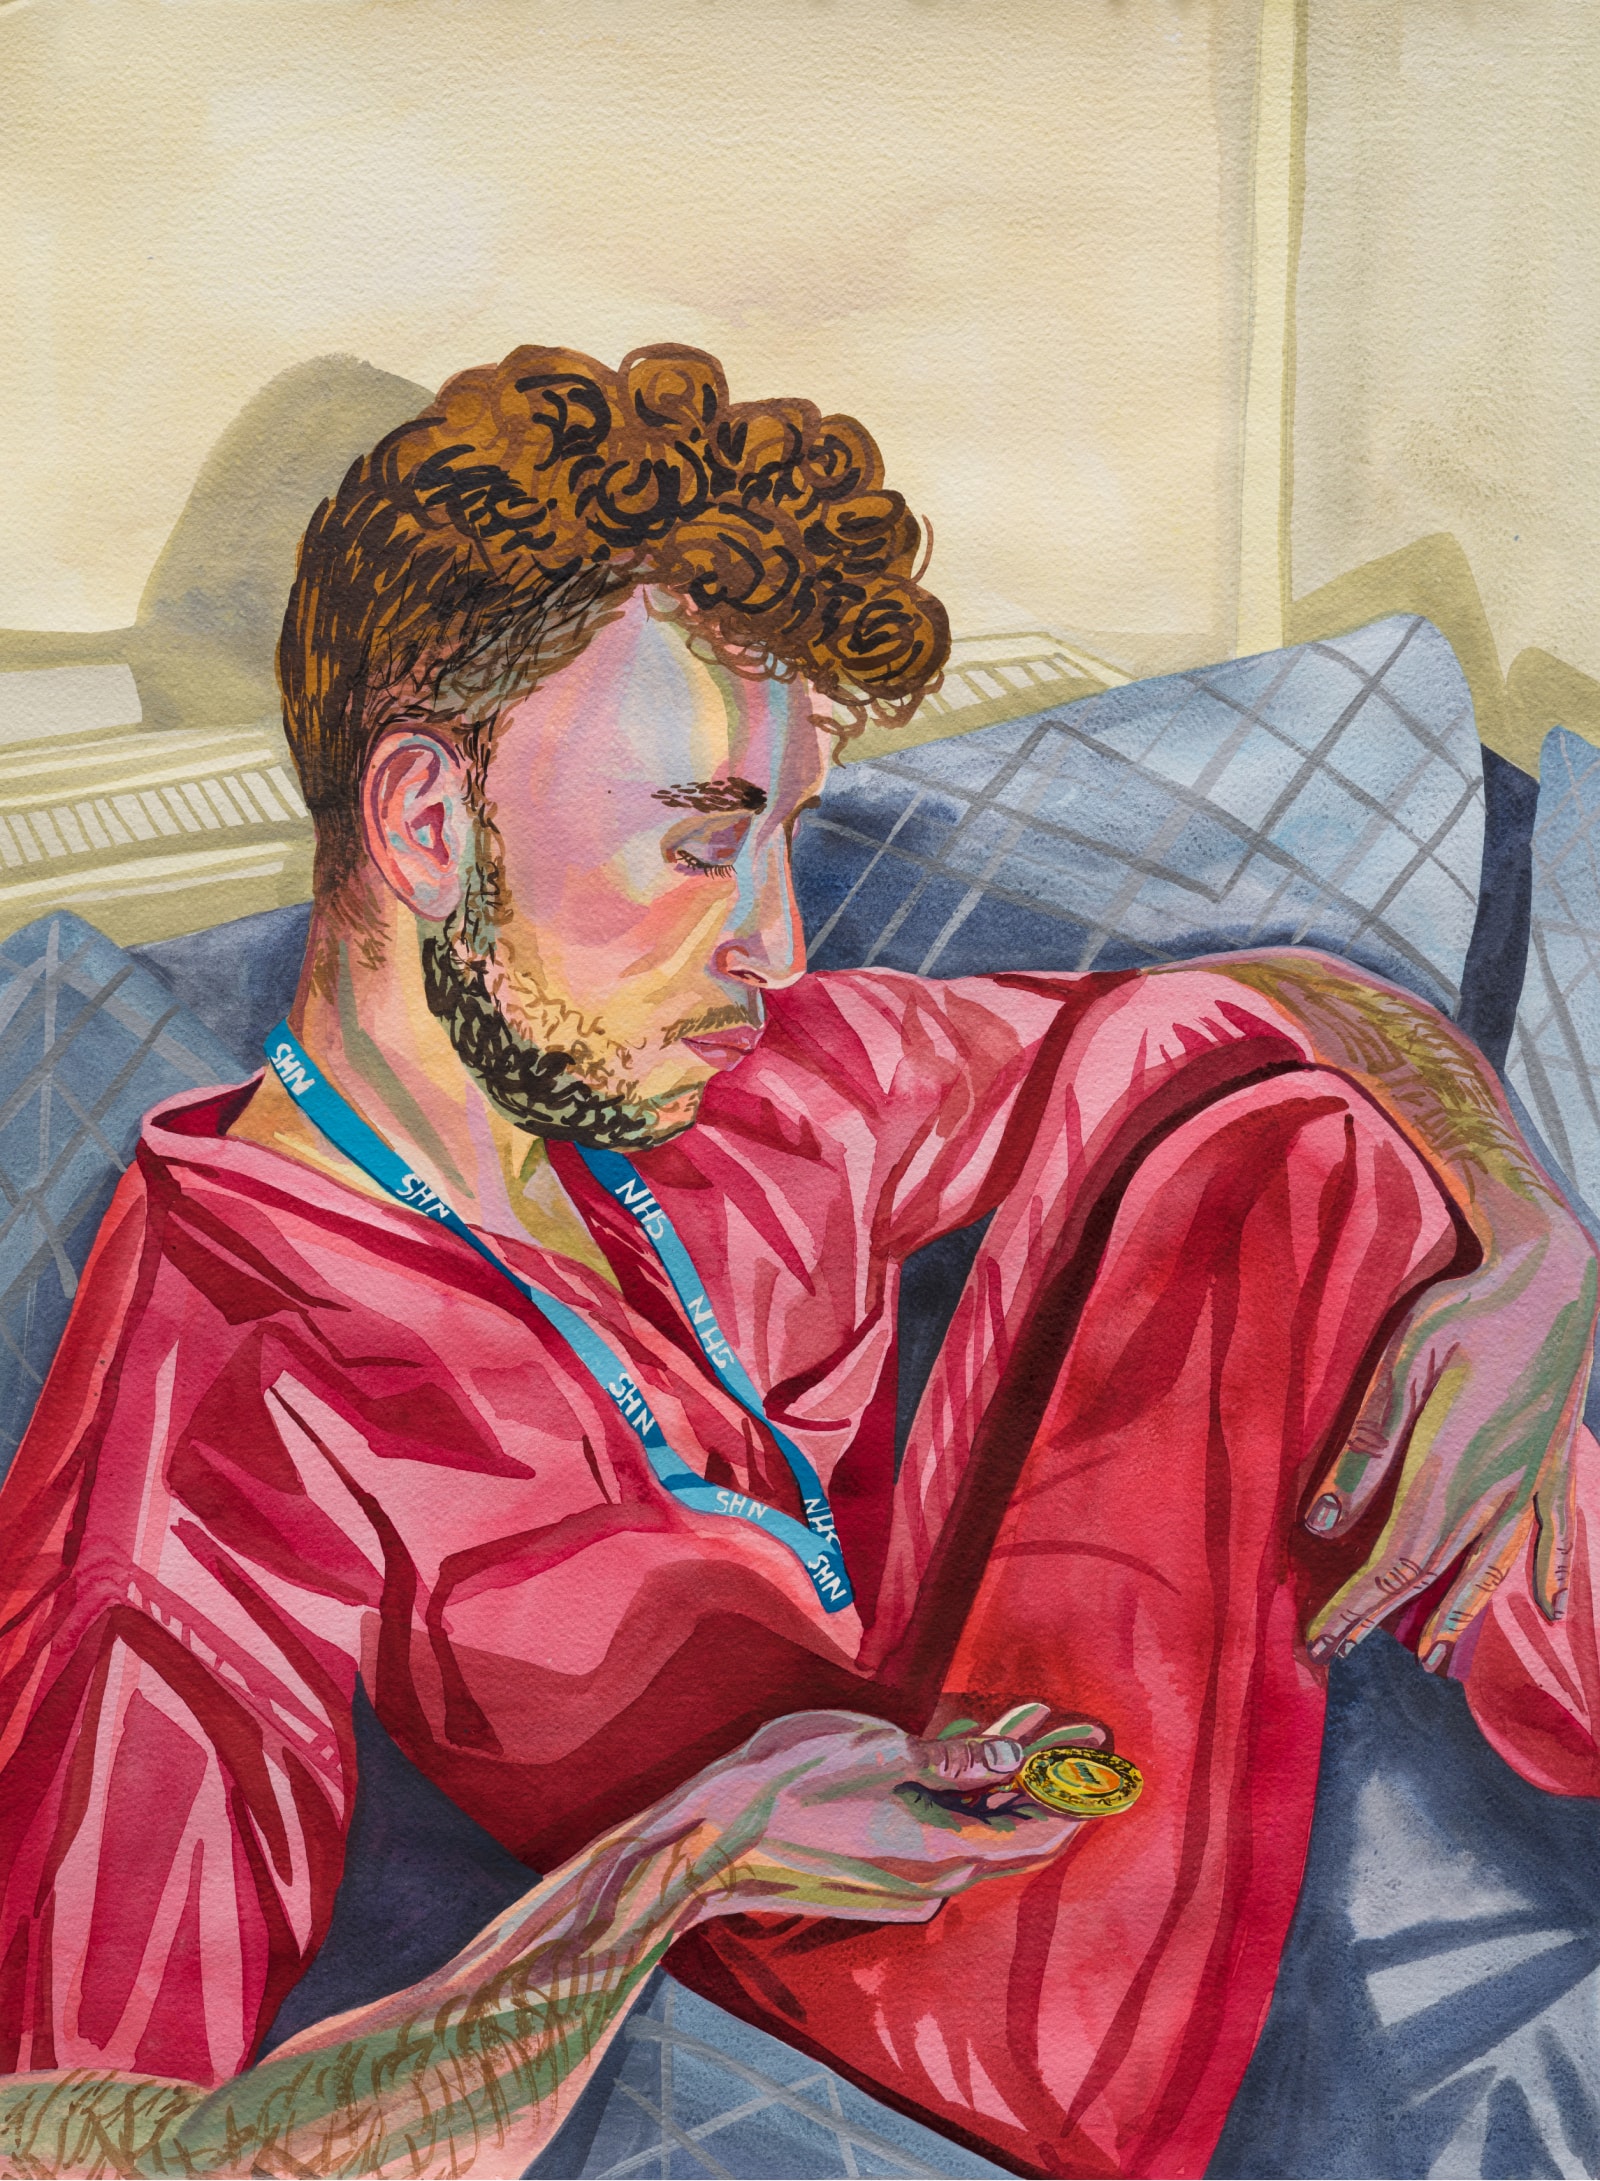 Artwork featuring a young man in red scrubs seated on a blue couch, looking at a gold metal